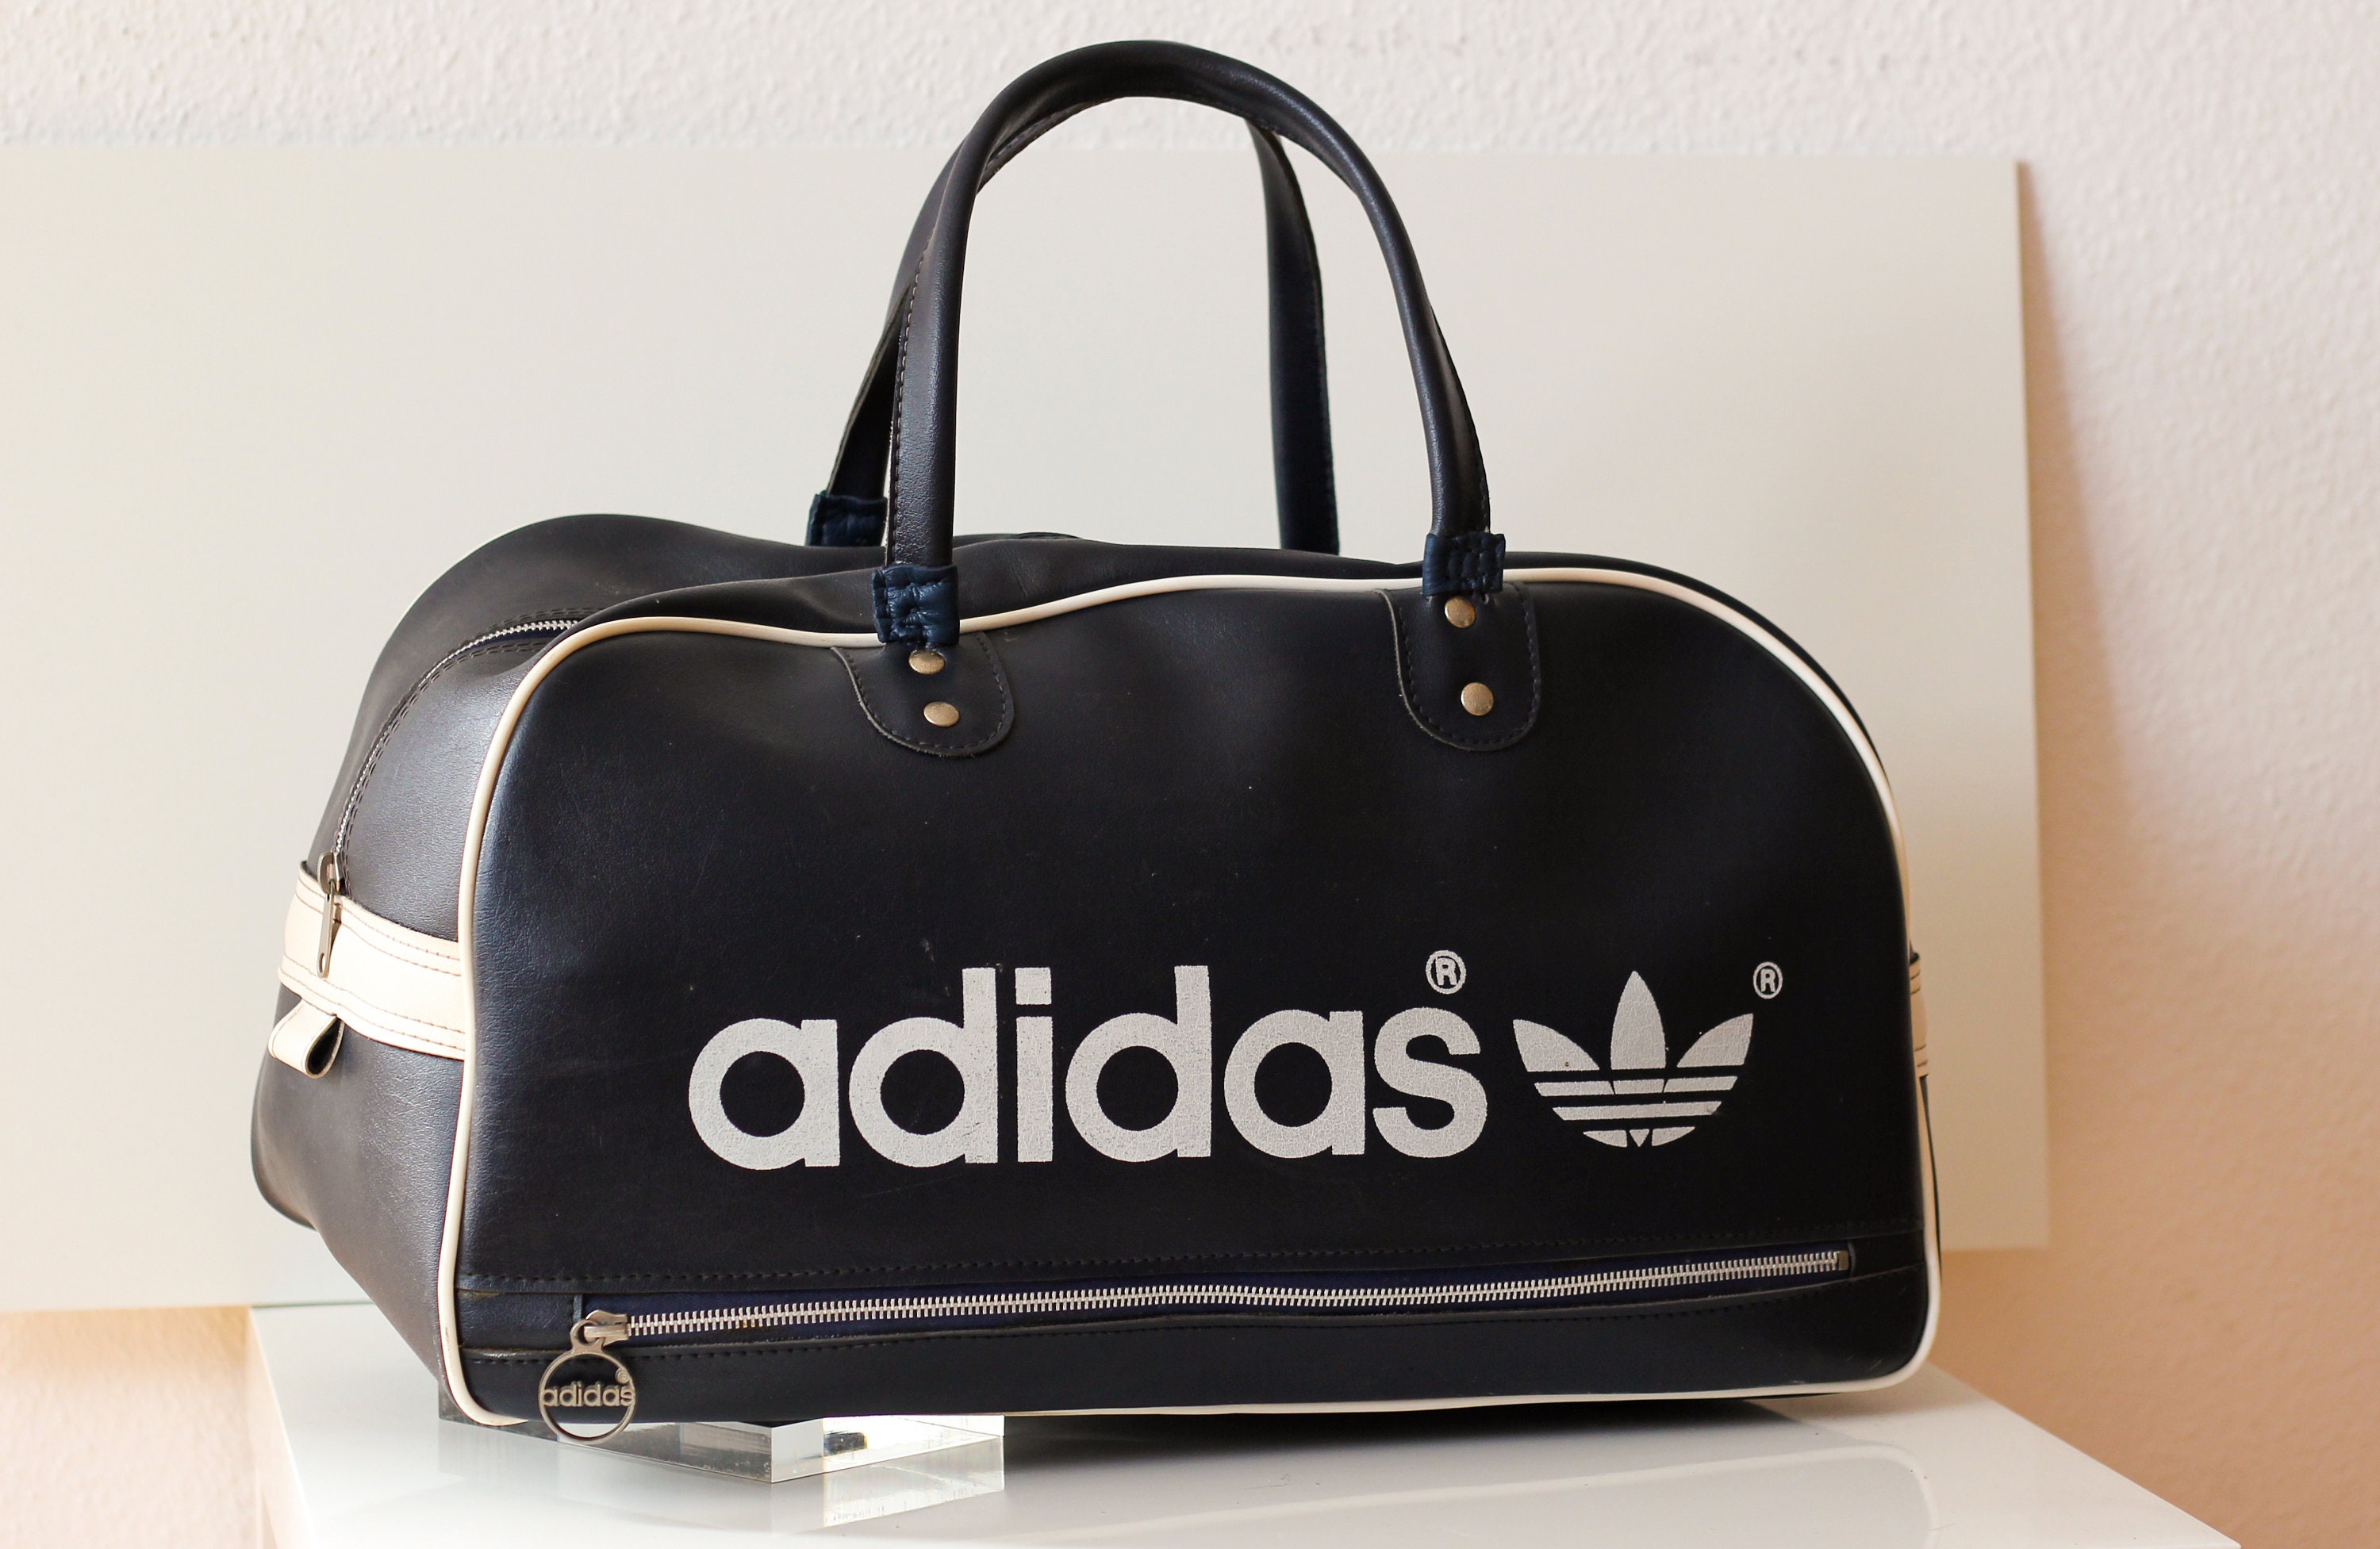 True Vintage Adidas 70s Sports Bag Made in - Etsy